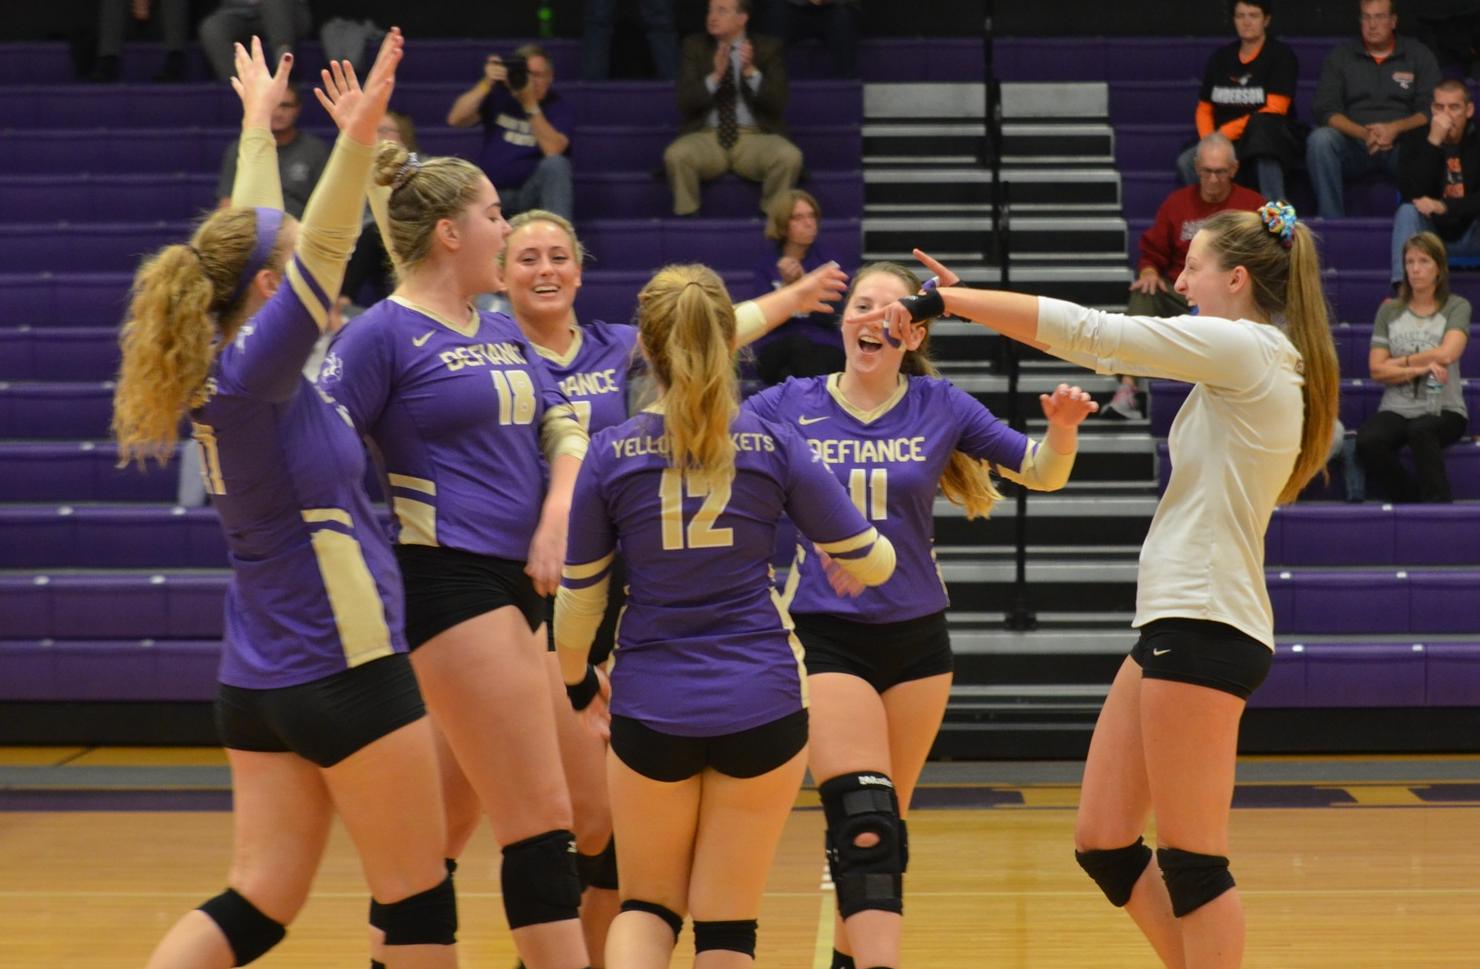 Volleyball Sweeps Their Way to HCAC Victory